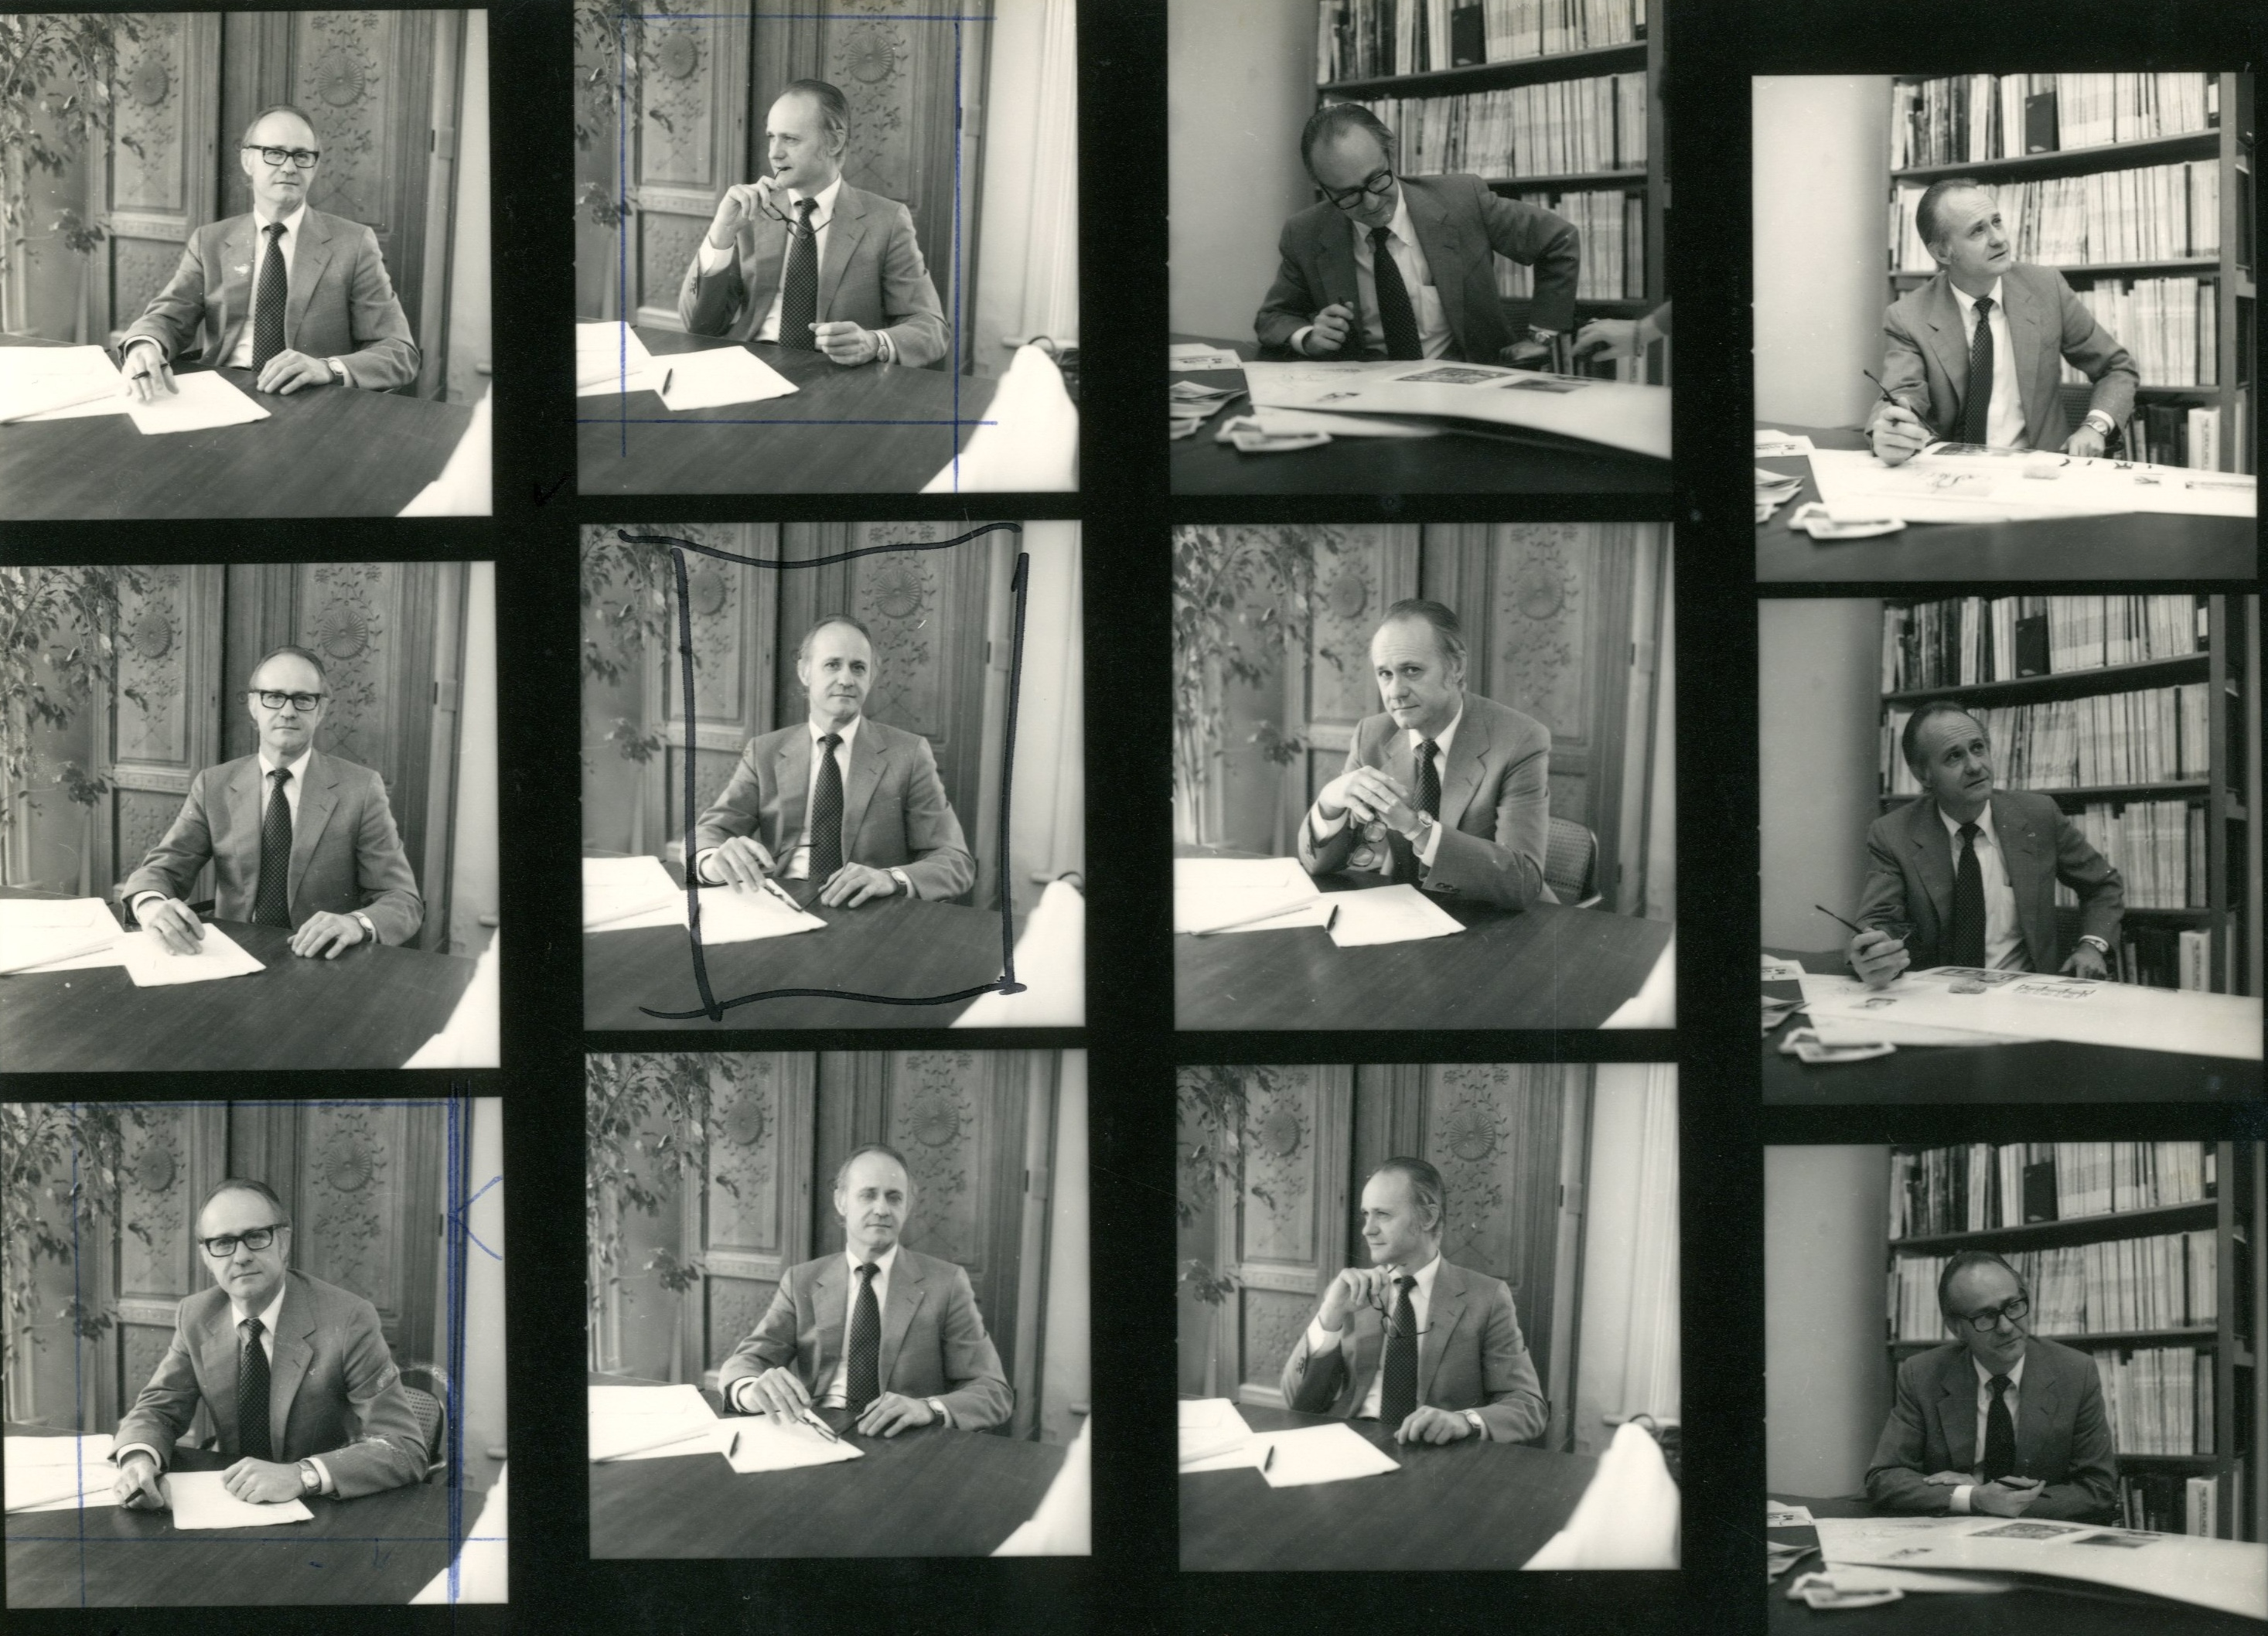 Contact sheet depicting portraits of Boone Powell